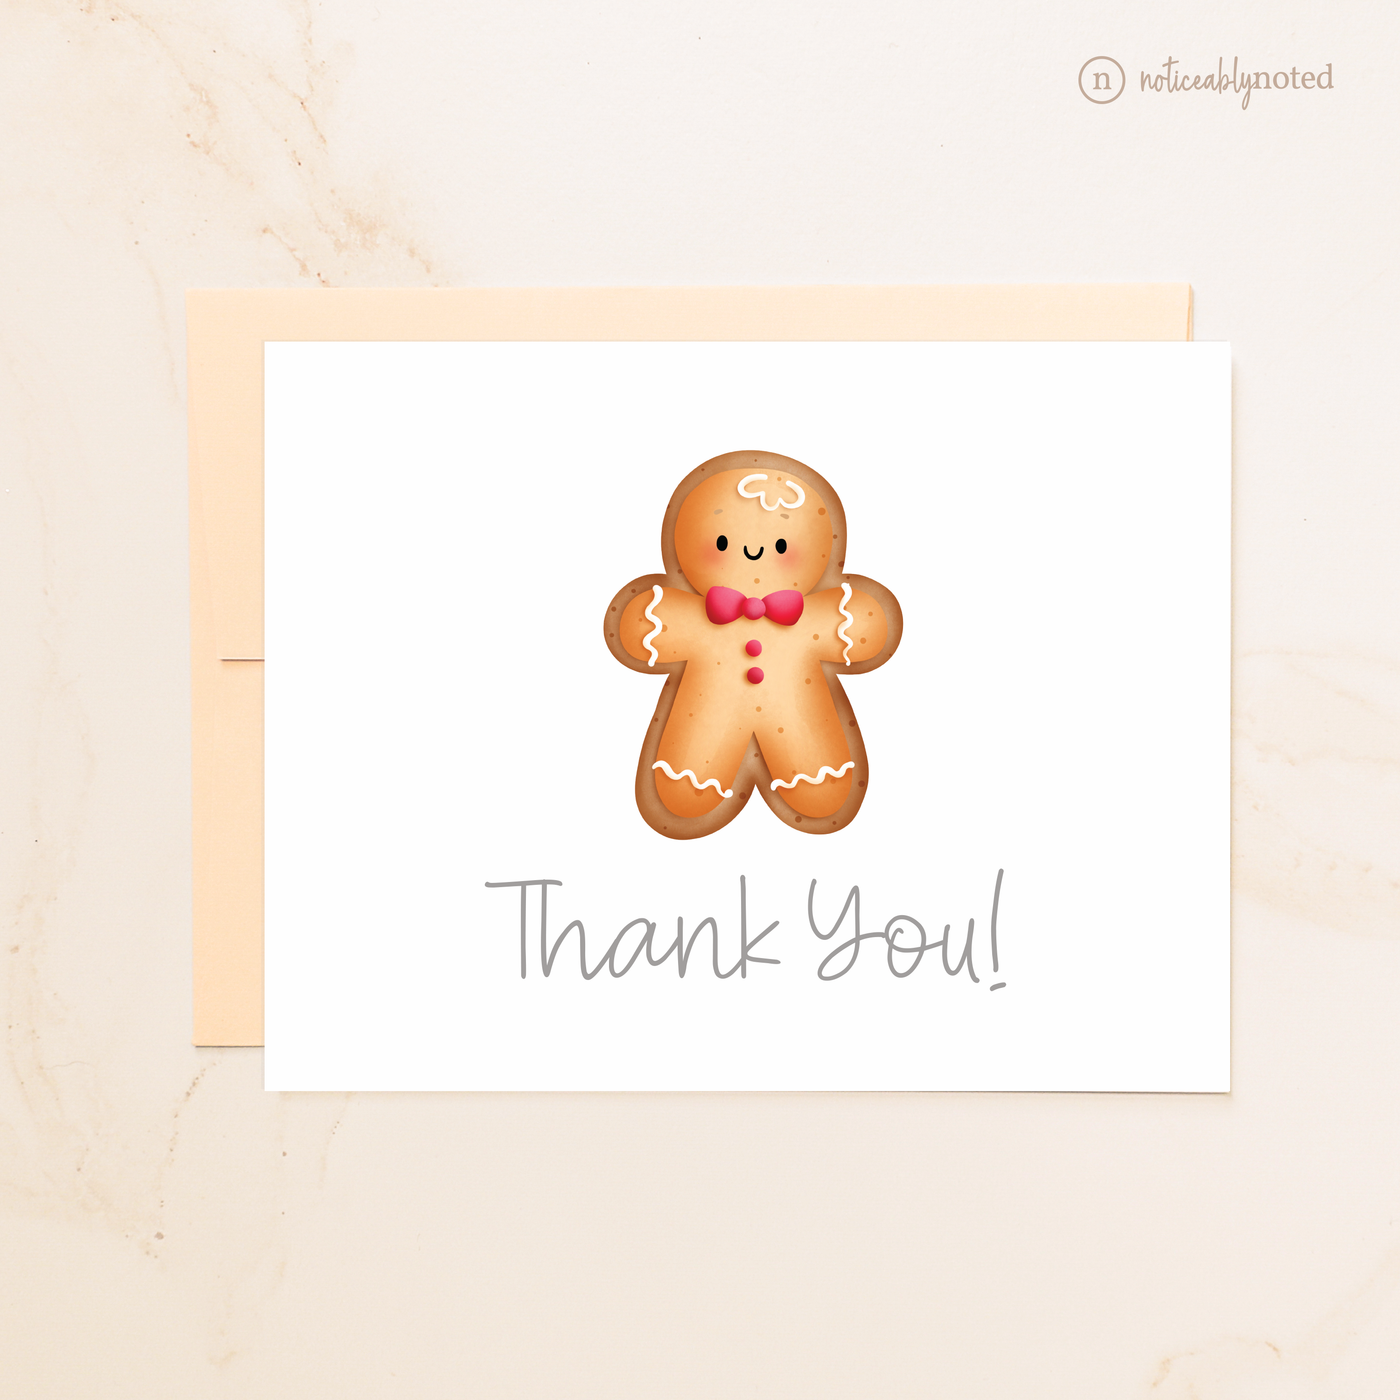 Gingerbread Cookie Folded Thank You Cards | Noticeably Noted